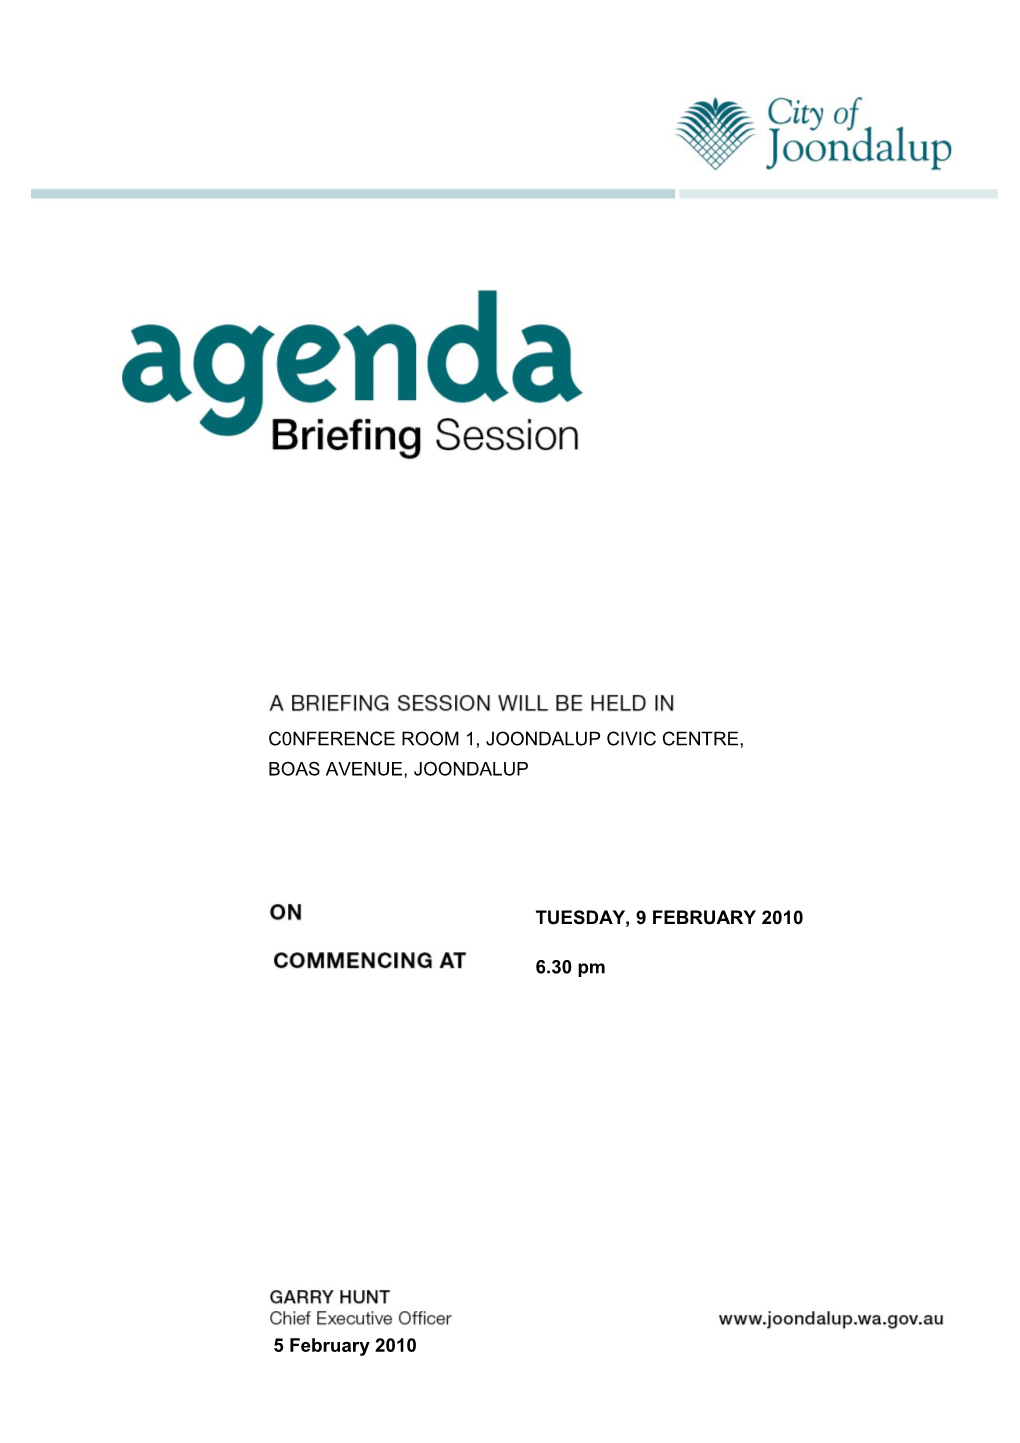 City of Joondalup - Agenda for Meeting of Council - 24.11.98